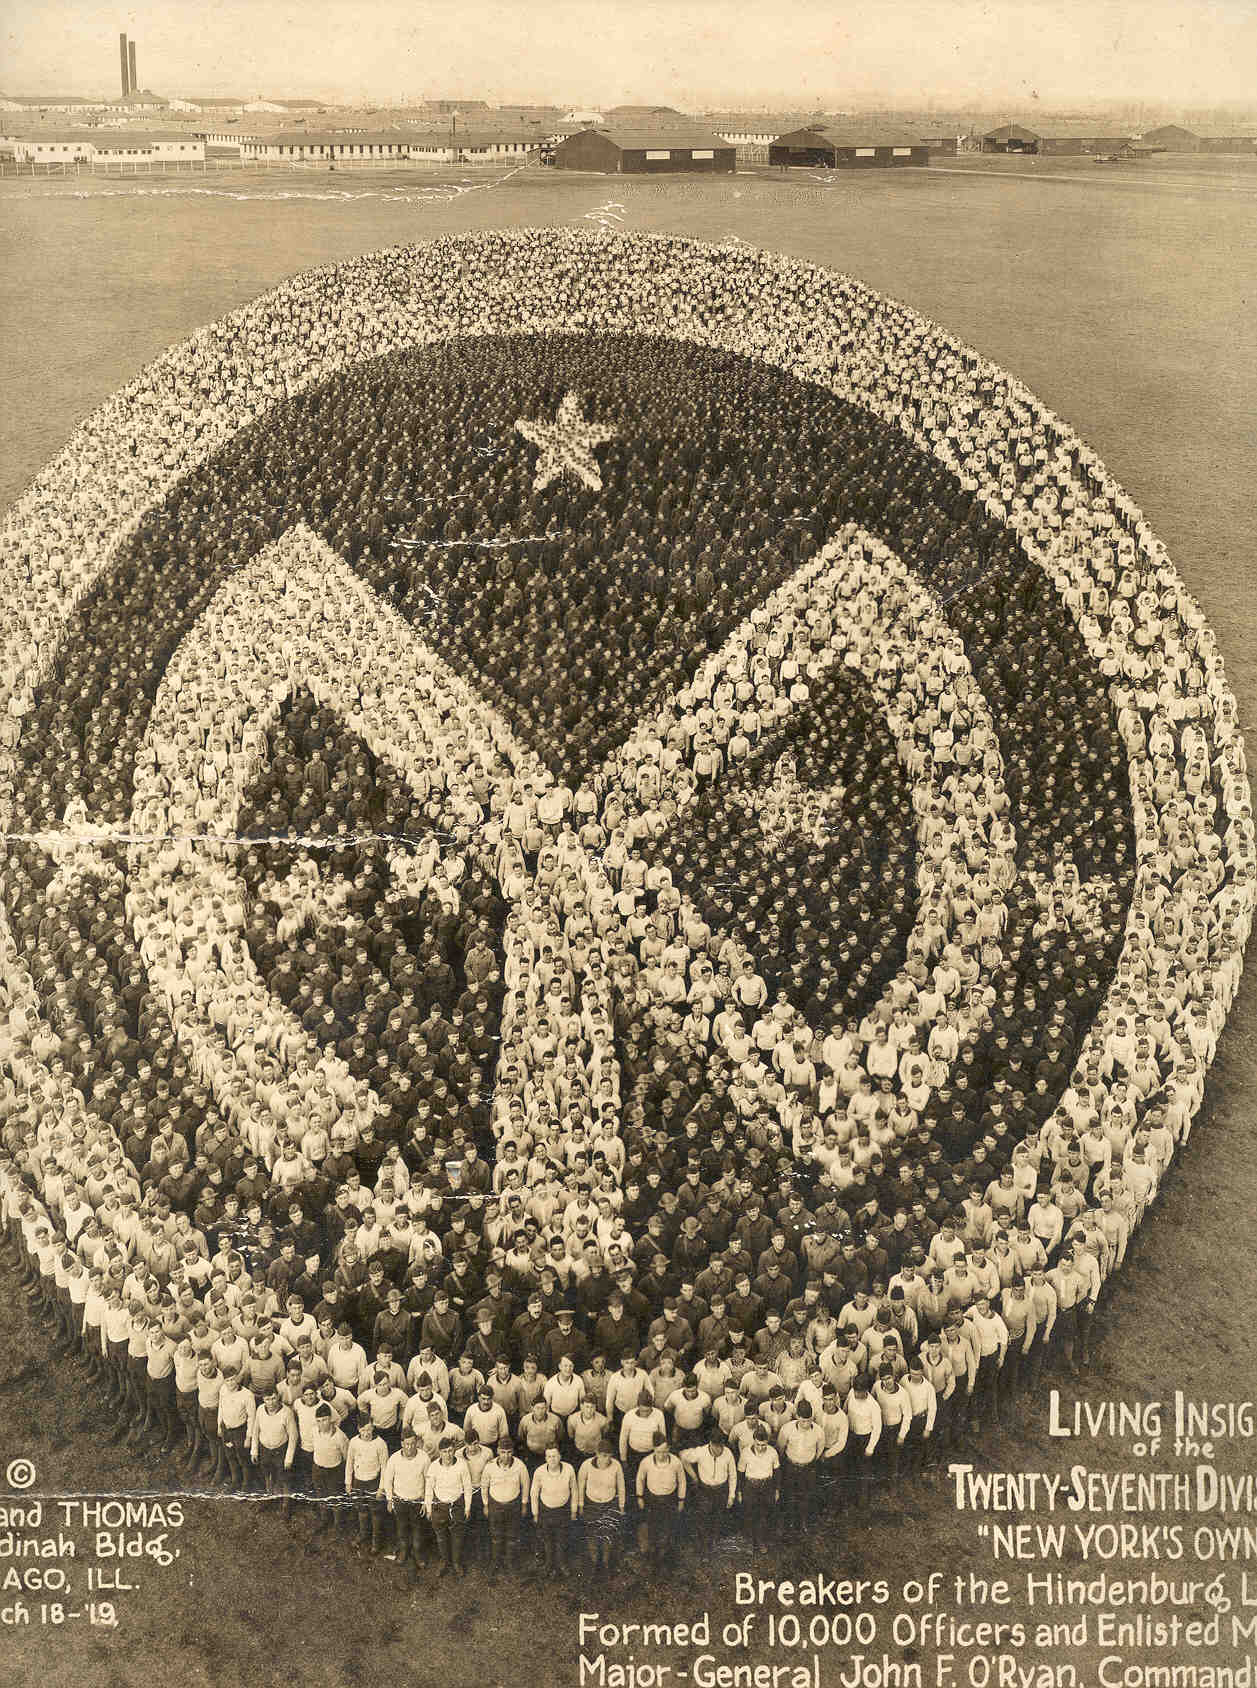 The Living Insignia of the 27th Division, a post war image formed by over 10,000 unit members. If image fails to appear click on this area